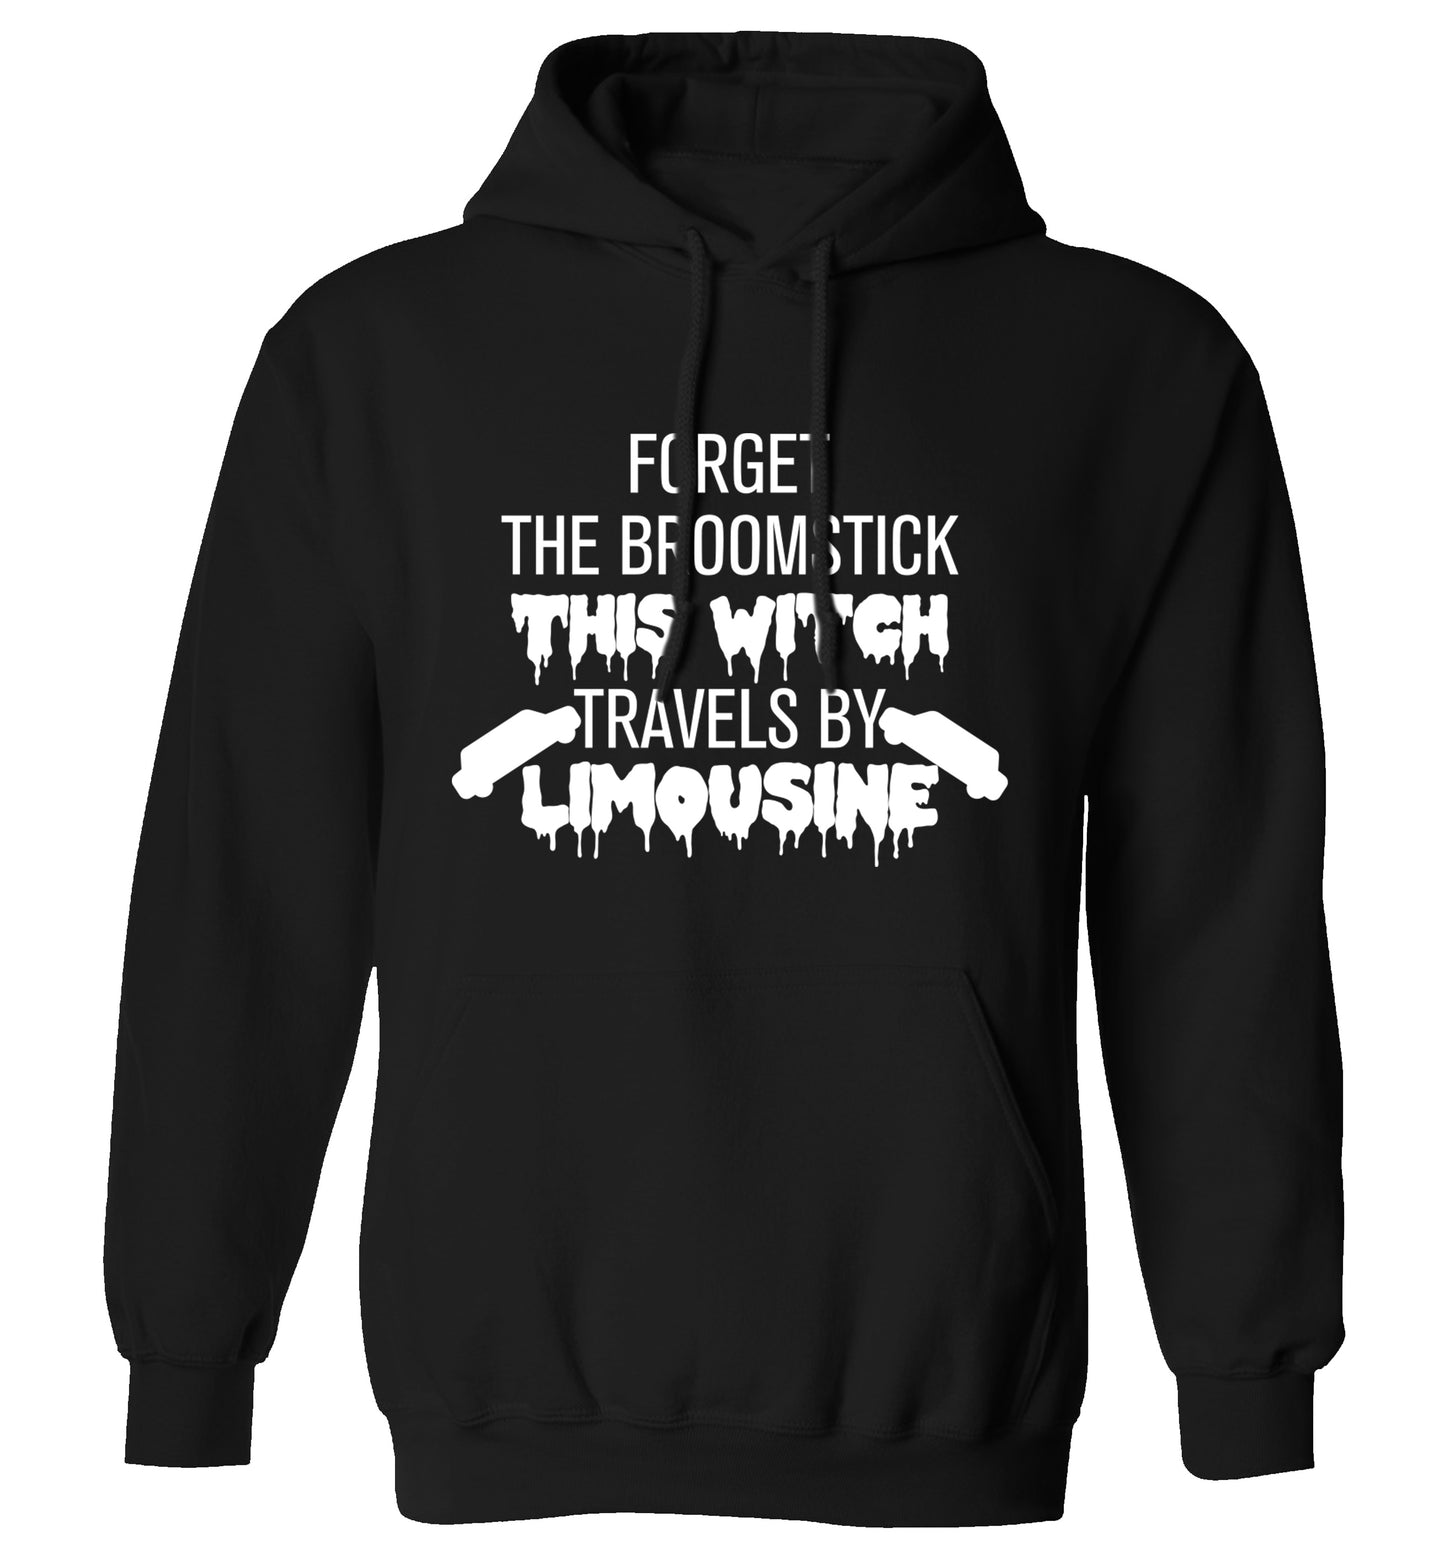 Forget the broomstick this witch travels by limousine adults unisexblack hoodie 2XL